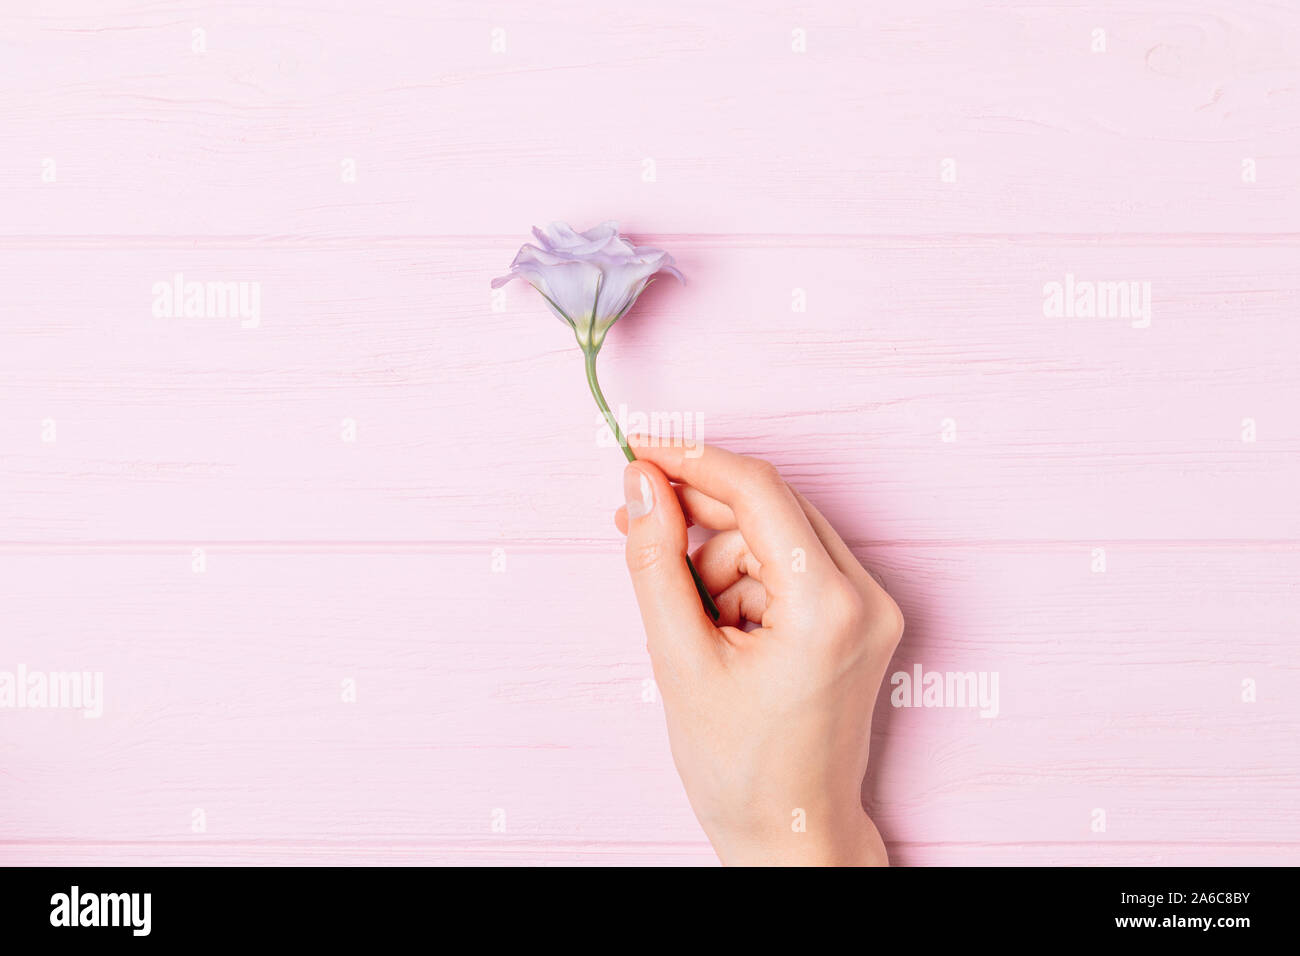 Top view woman's hand holding one purple flower lisianthus on pink wooden table, minimal flat lay. Stock Photo